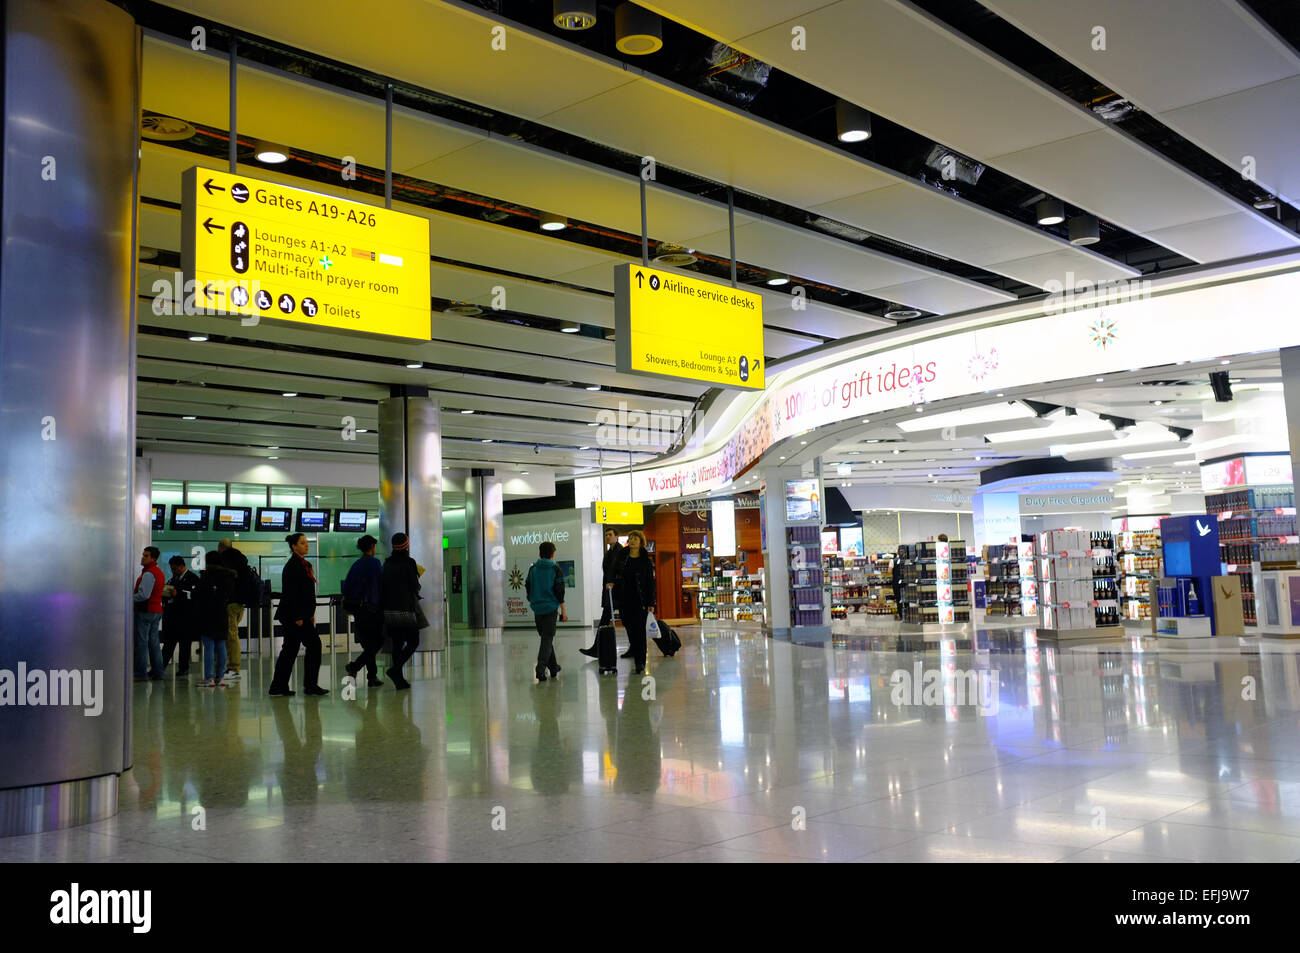 Information boards inside Heathrow airport in the UK. Stock Photo